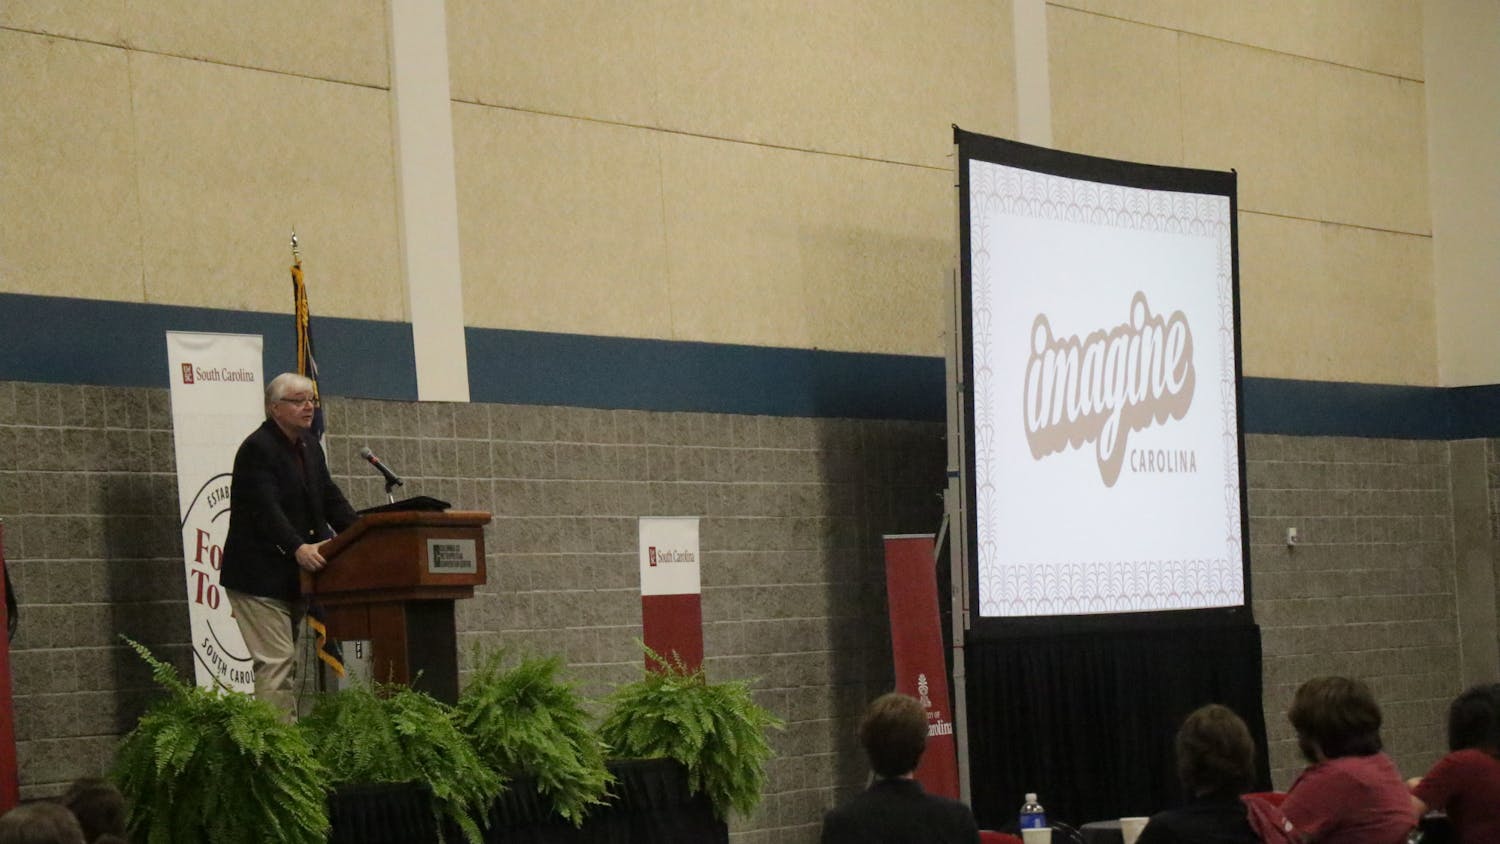 FILE—University of South Carolina President Michael Amiridis addresses students at the Imagine Carolina event in the Columbia Metropolitan Convention Center on September 11, 2022. The event was used to gather information from students about what the problems they see at the university.